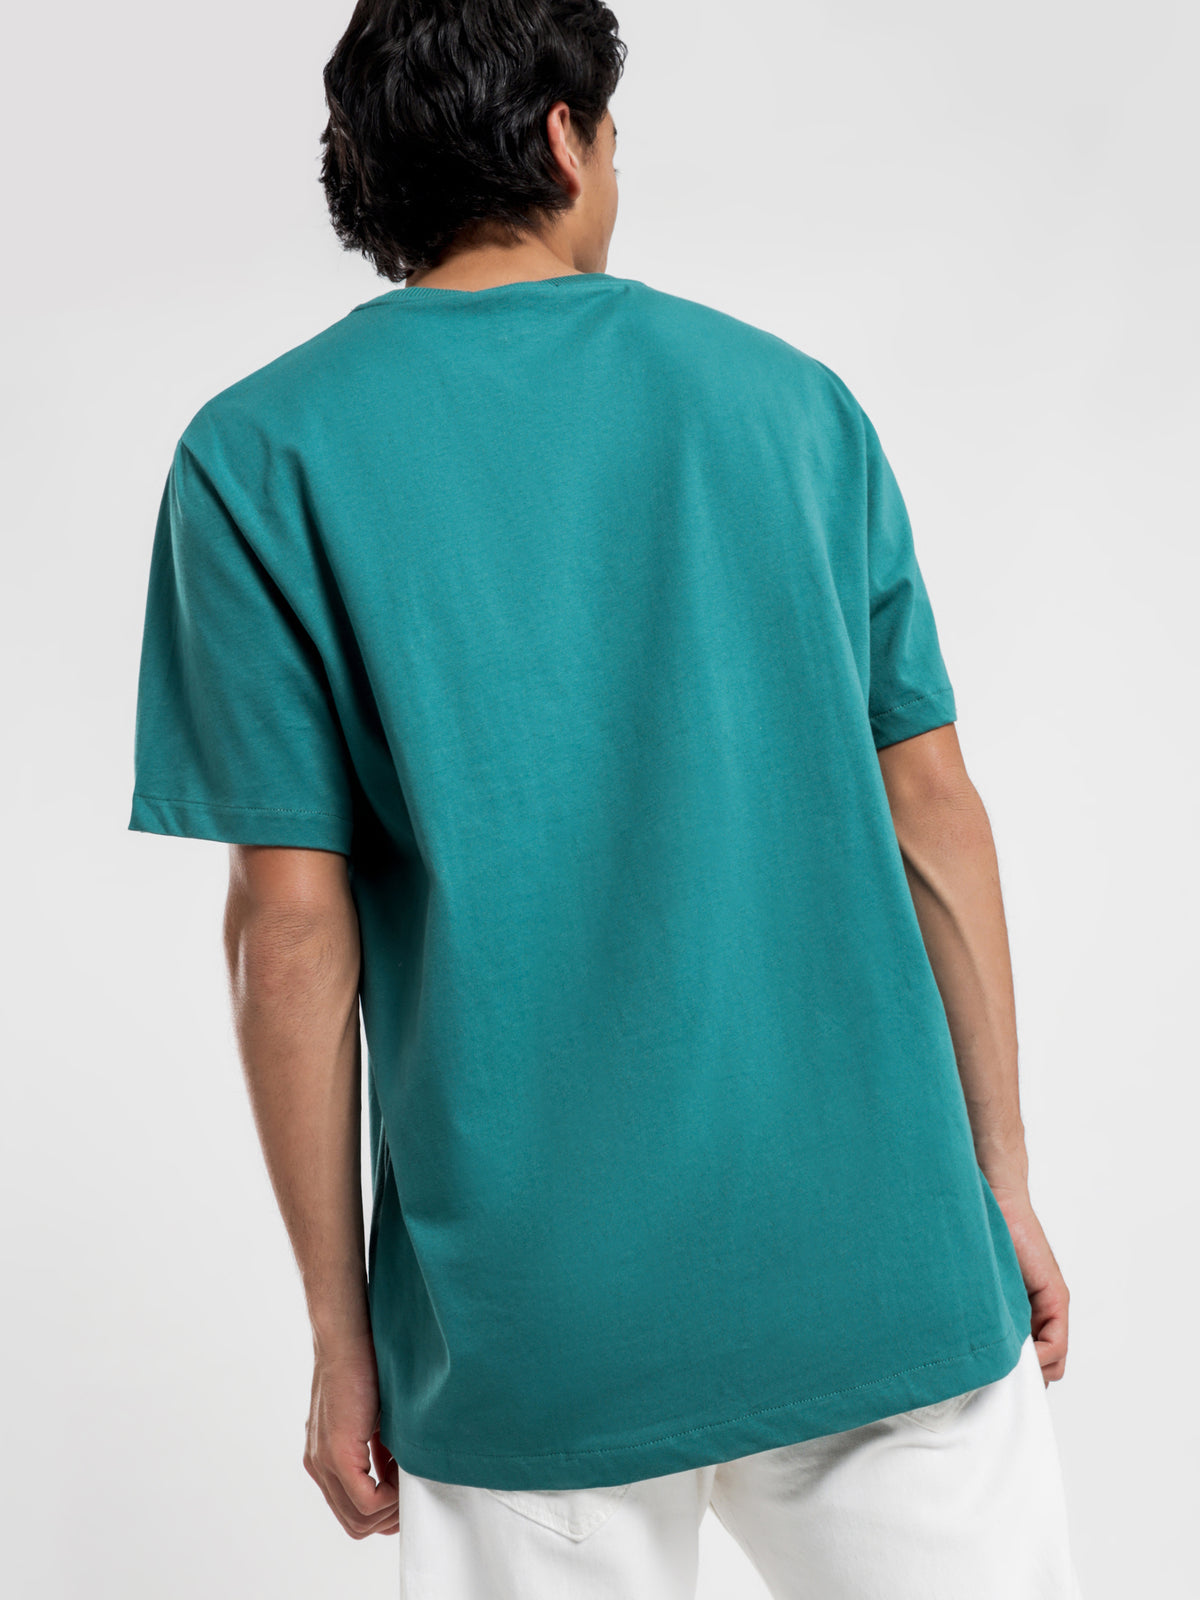 Graphic T-Shirt in Light Petrol